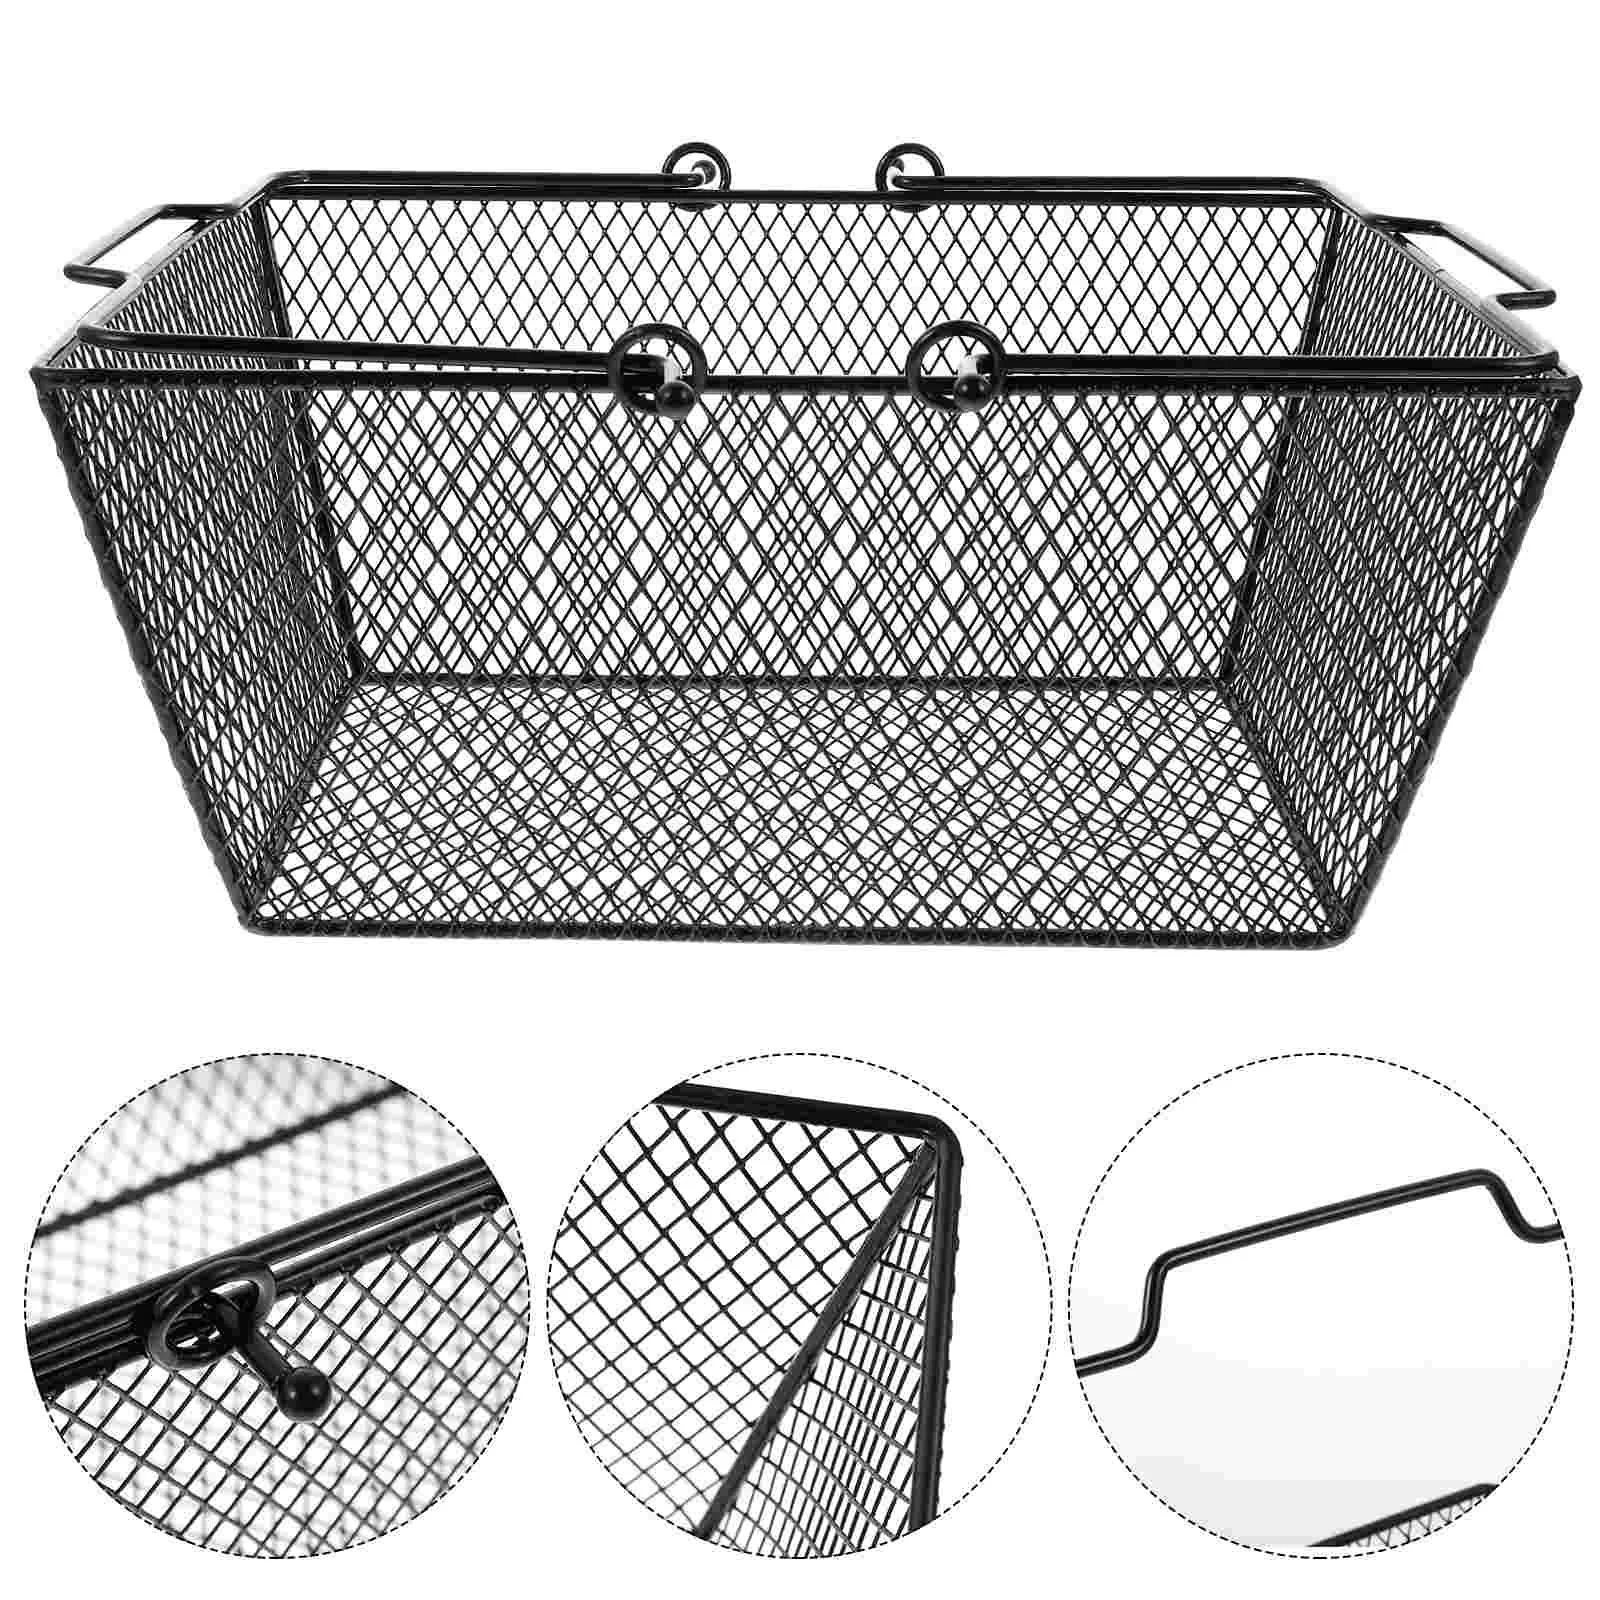 

Metal Shopping Basket Storage Container Handle Office Desk Decorations Home Eggs Decorate Fruit Clothing Sundries Organizer